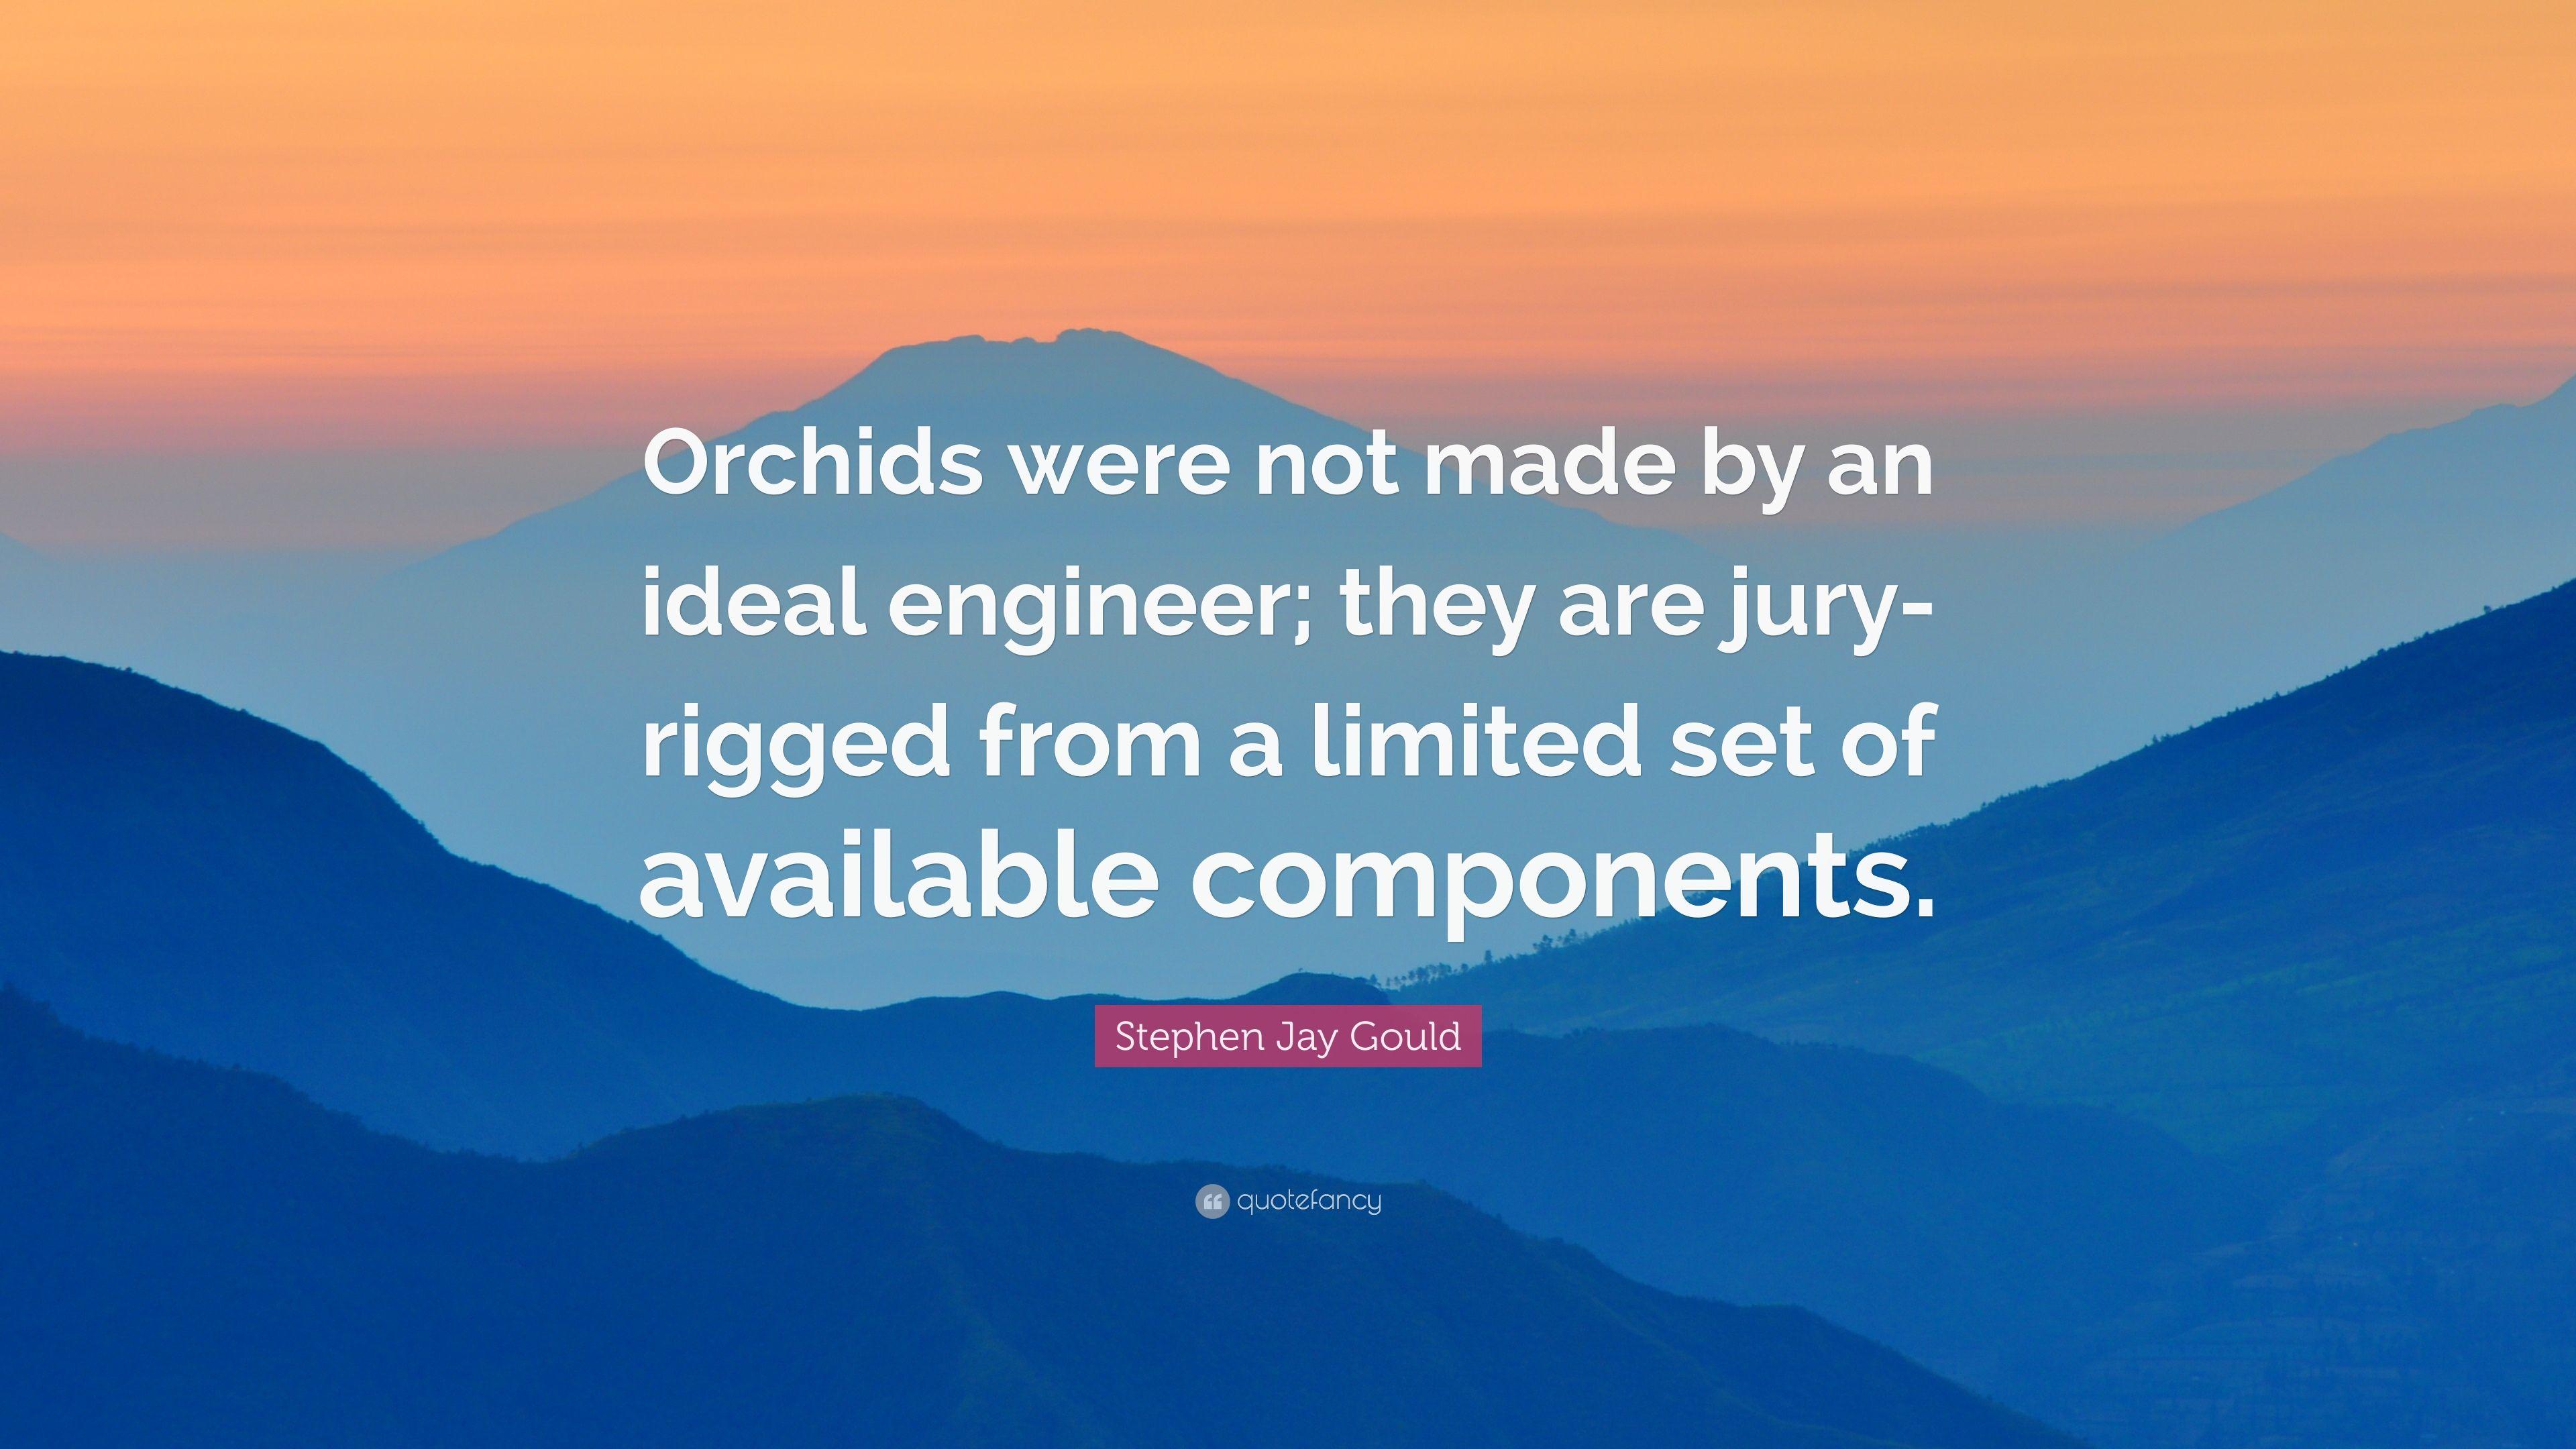 Stephen Jay Gould Quote: “Orchids were not made by an ideal engineer